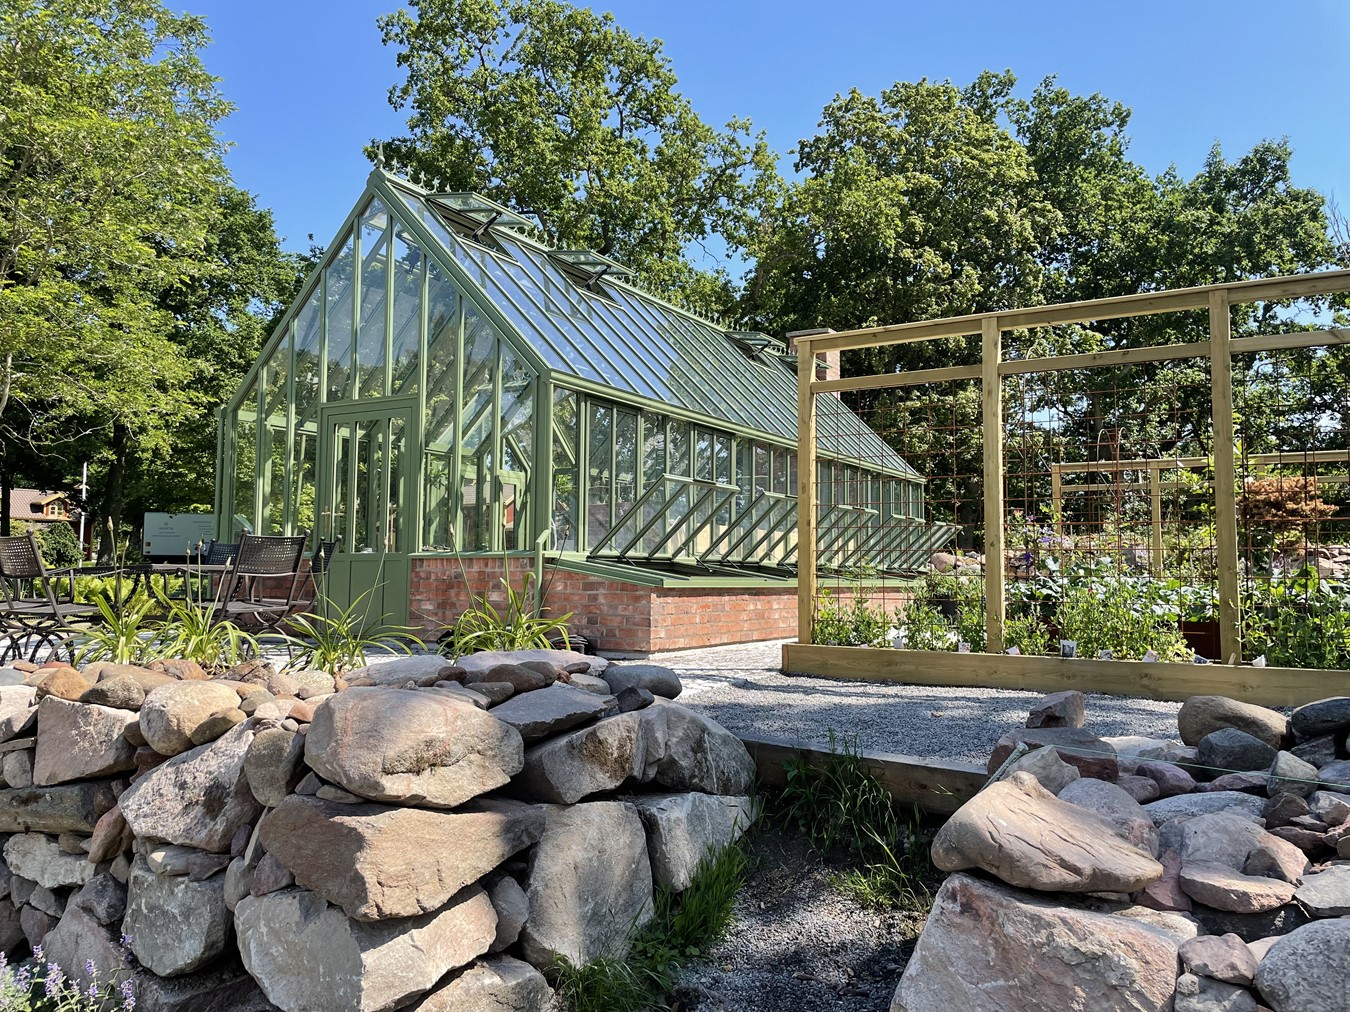 The rose greenhouse pimpinell with coldframes